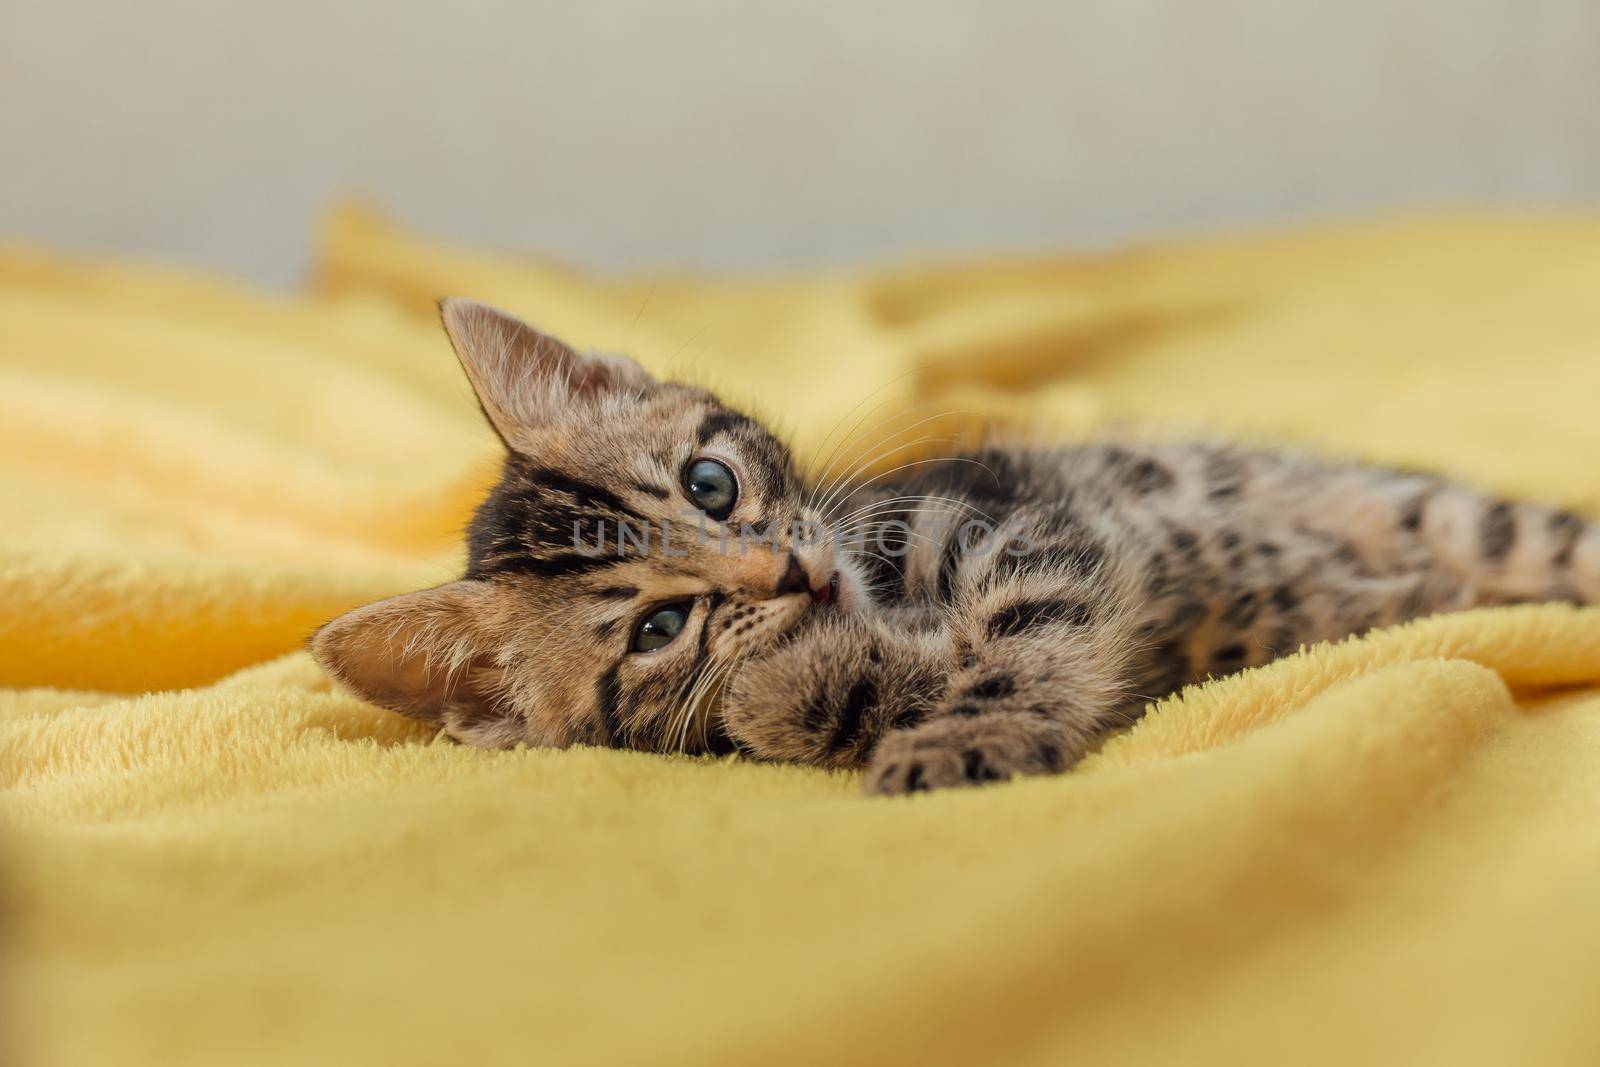 Cute bengal one month old kitten laying on the yellow blanket close-up.